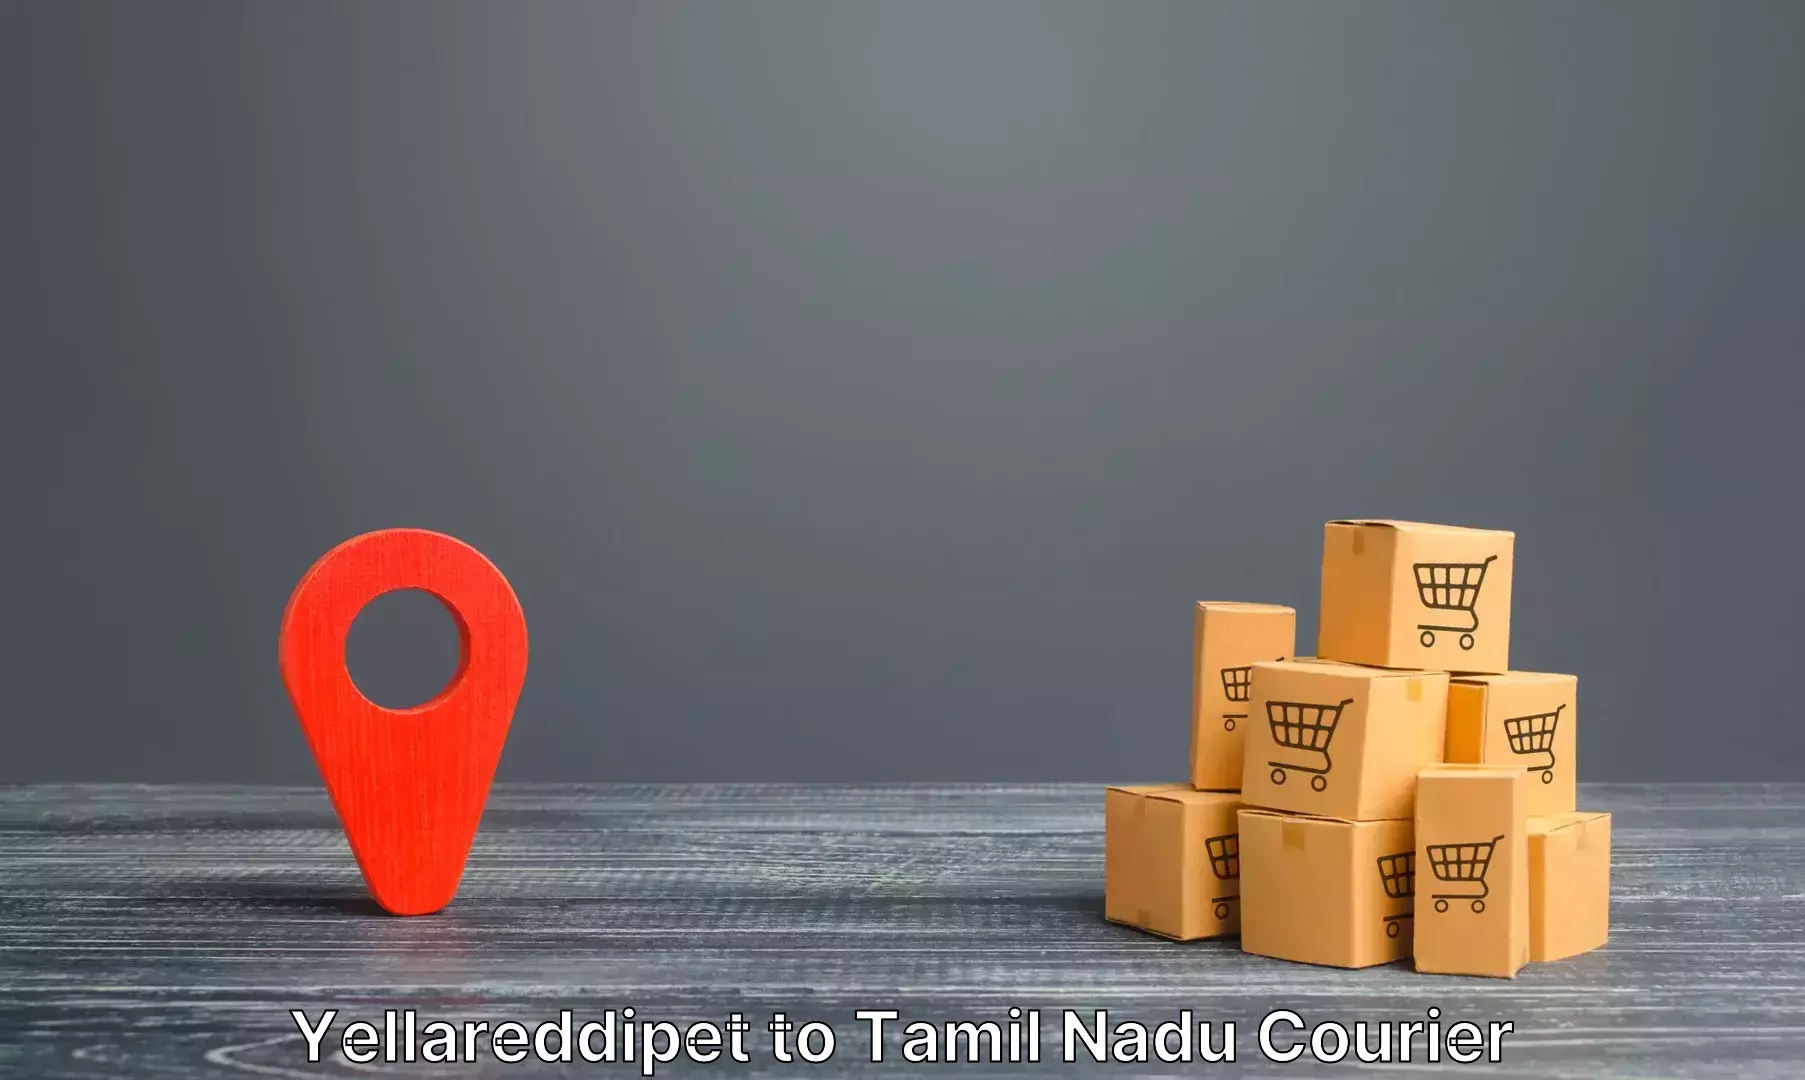 Door-to-door baggage service in Yellareddipet to Meenakshi Academy of Higher Education and Research Chennai